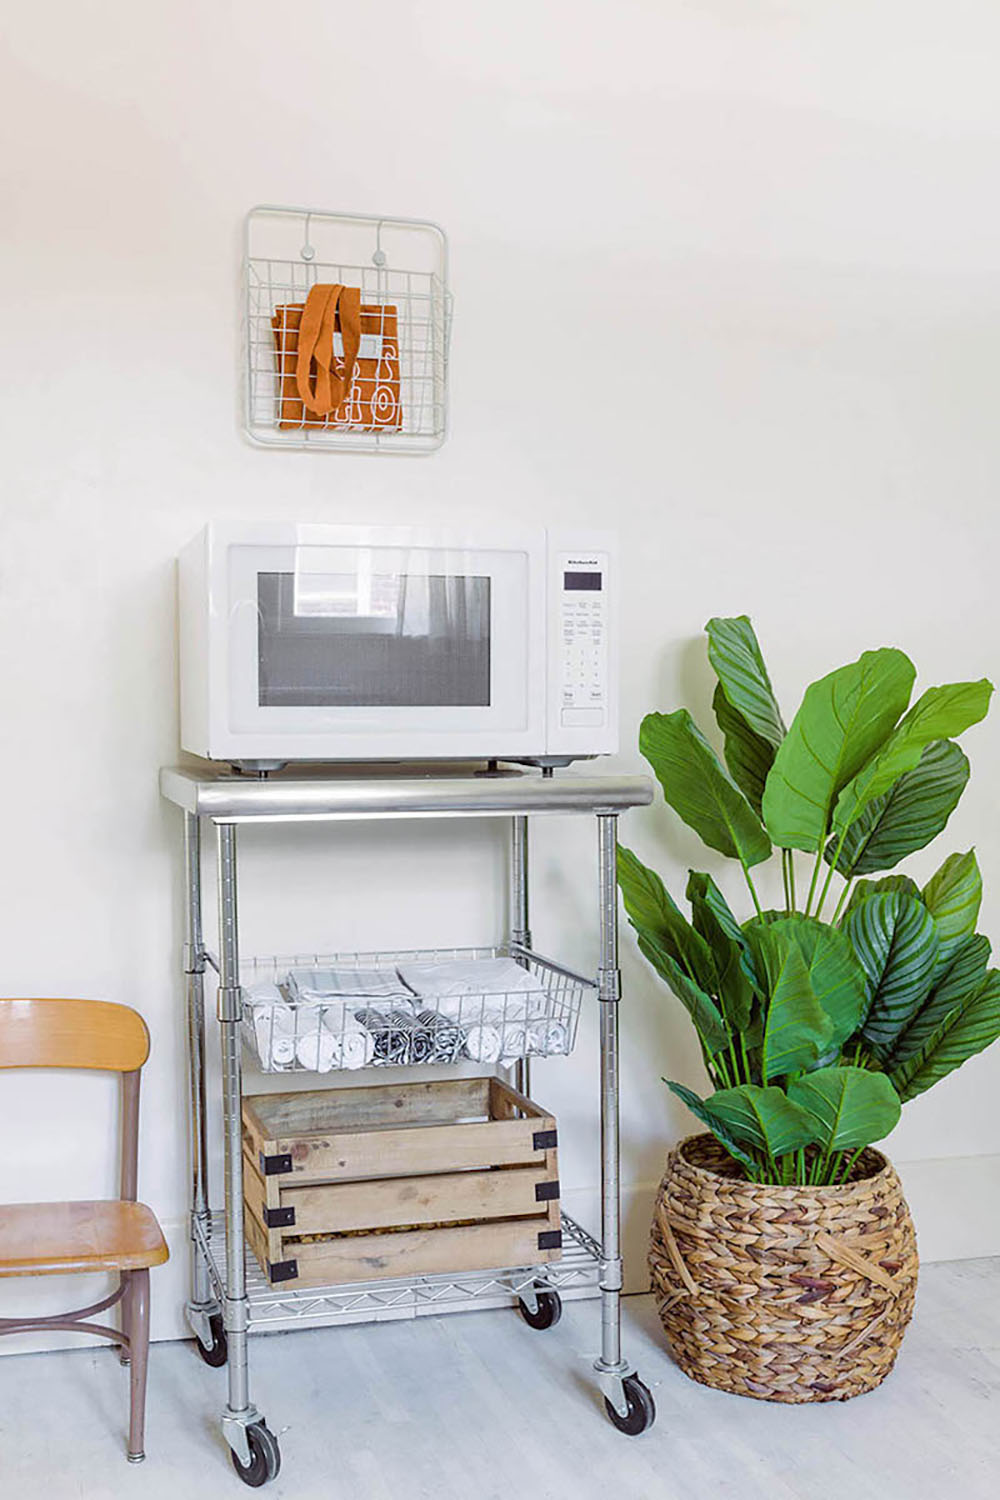 Microwave sitting on top of kitchen cart with baskets and decor